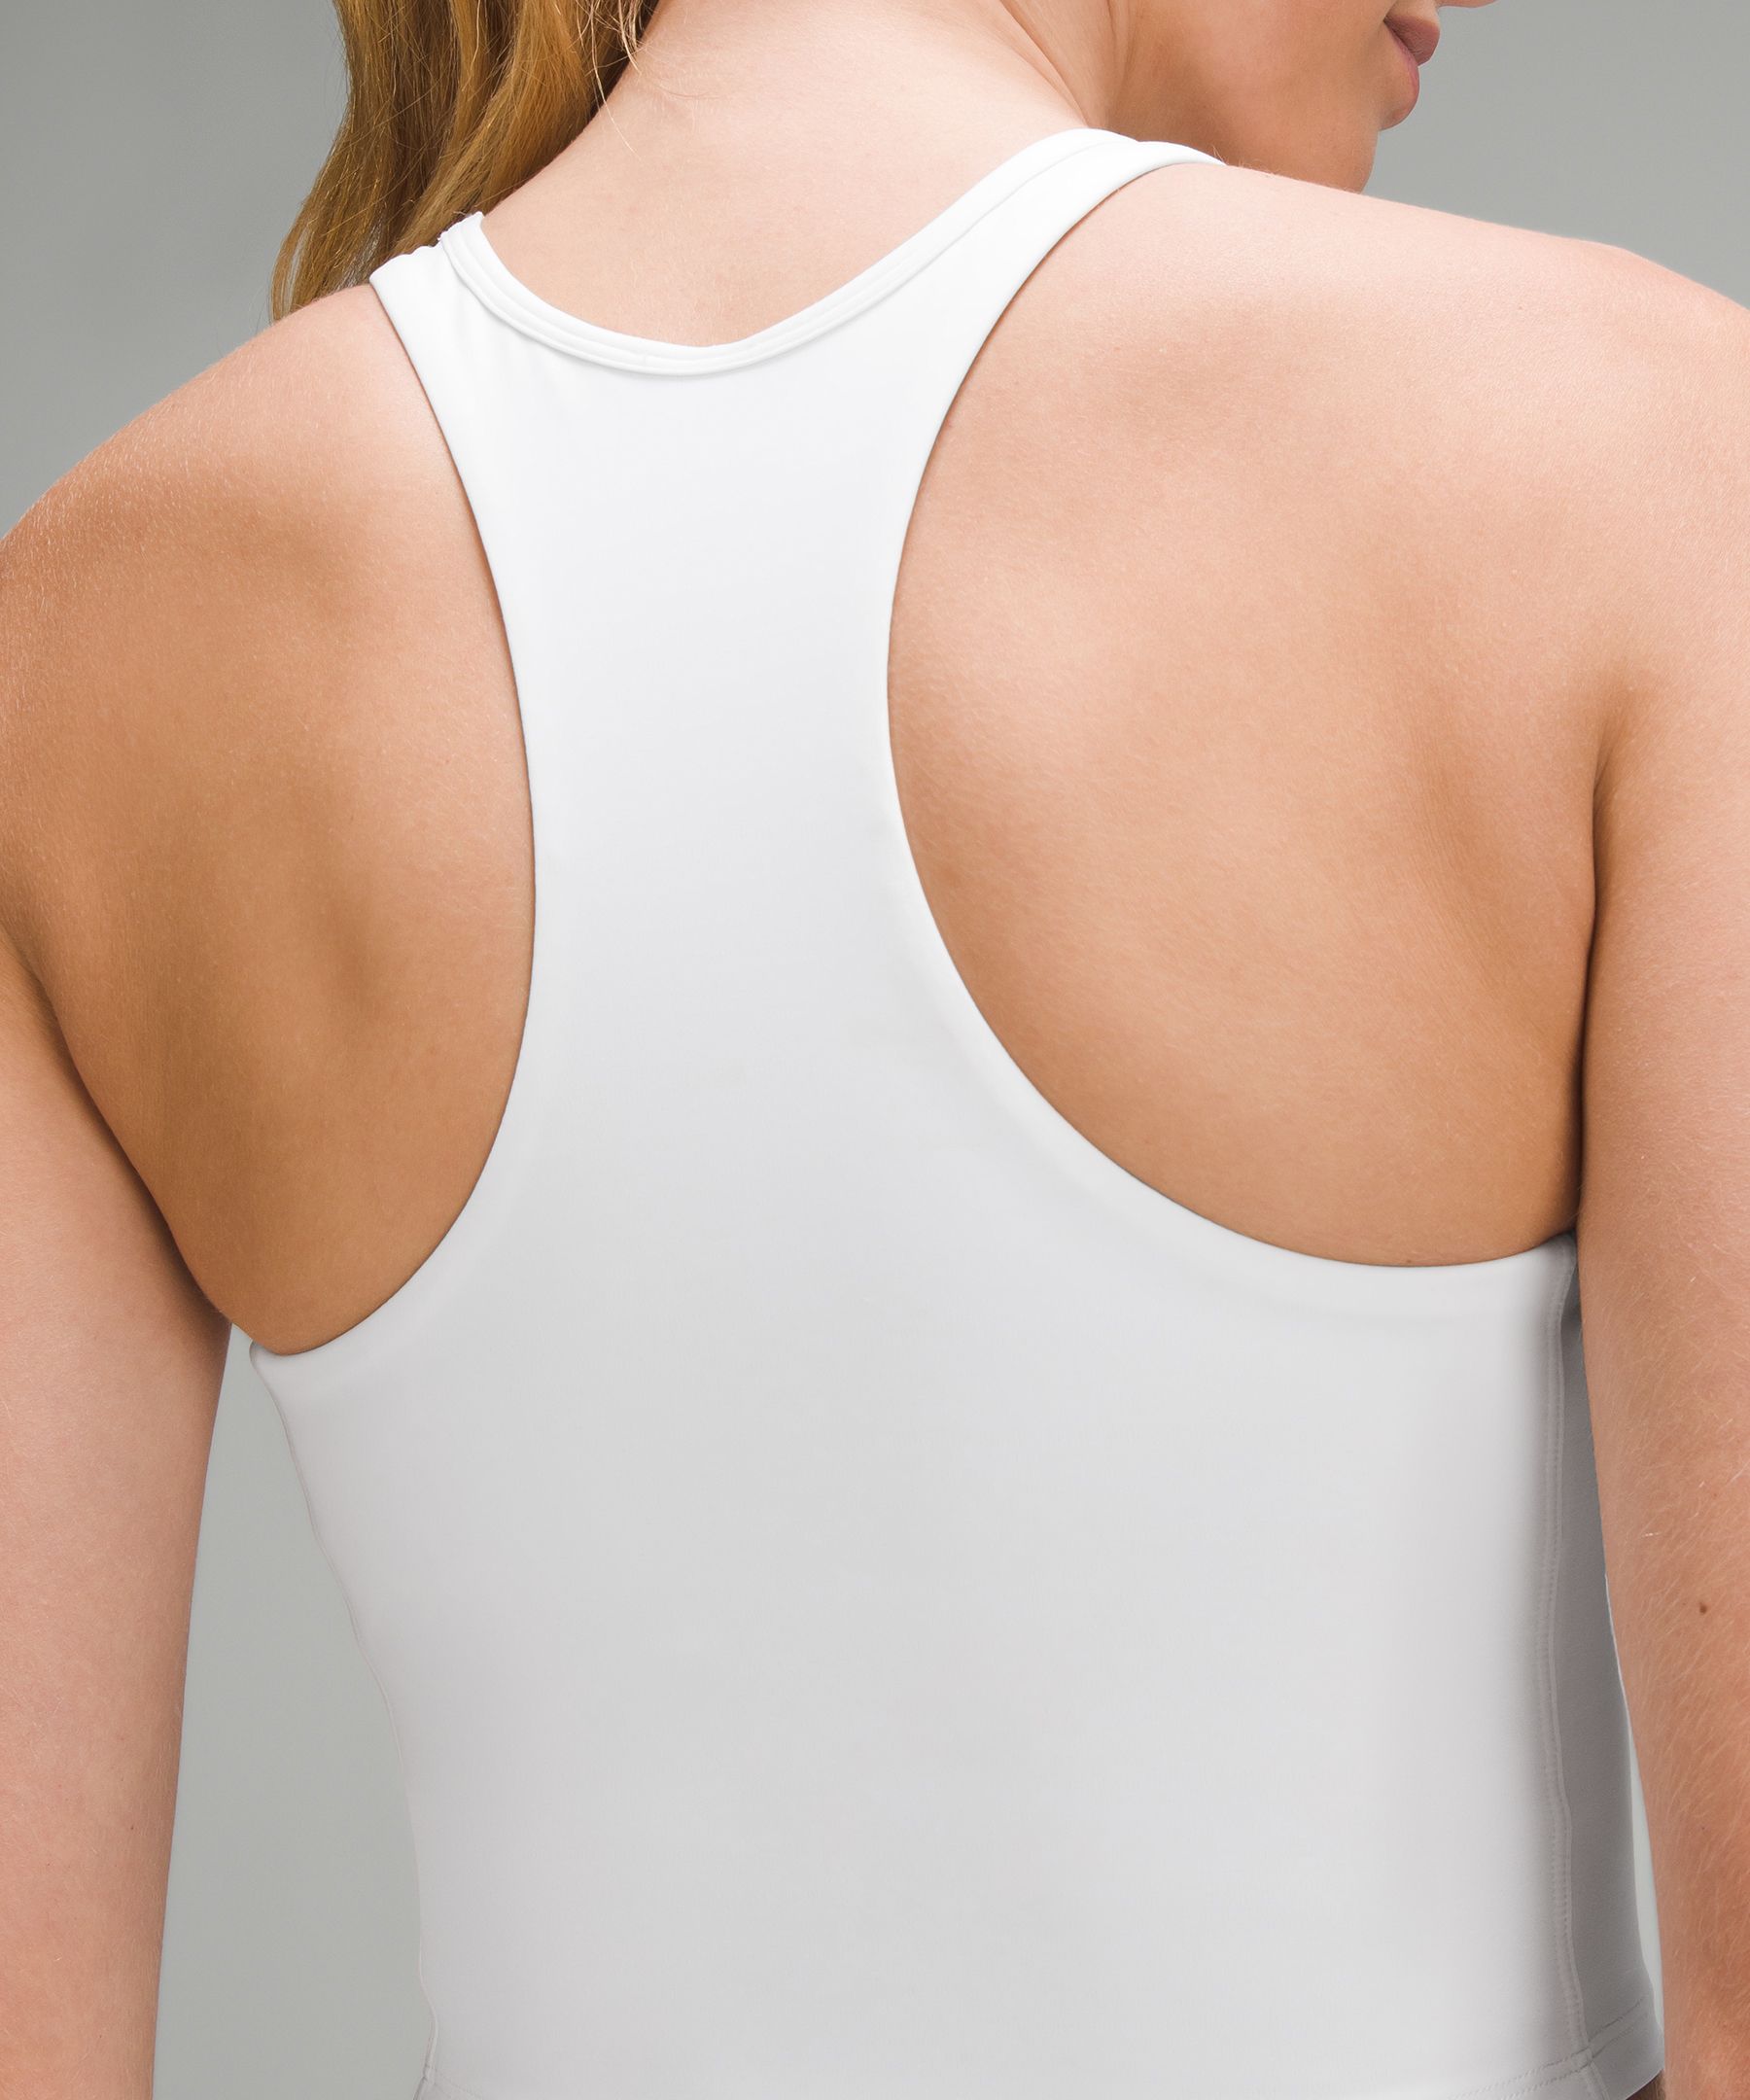 Lululemon Align Tank White Size 8 - $39 (32% Off Retail) New With